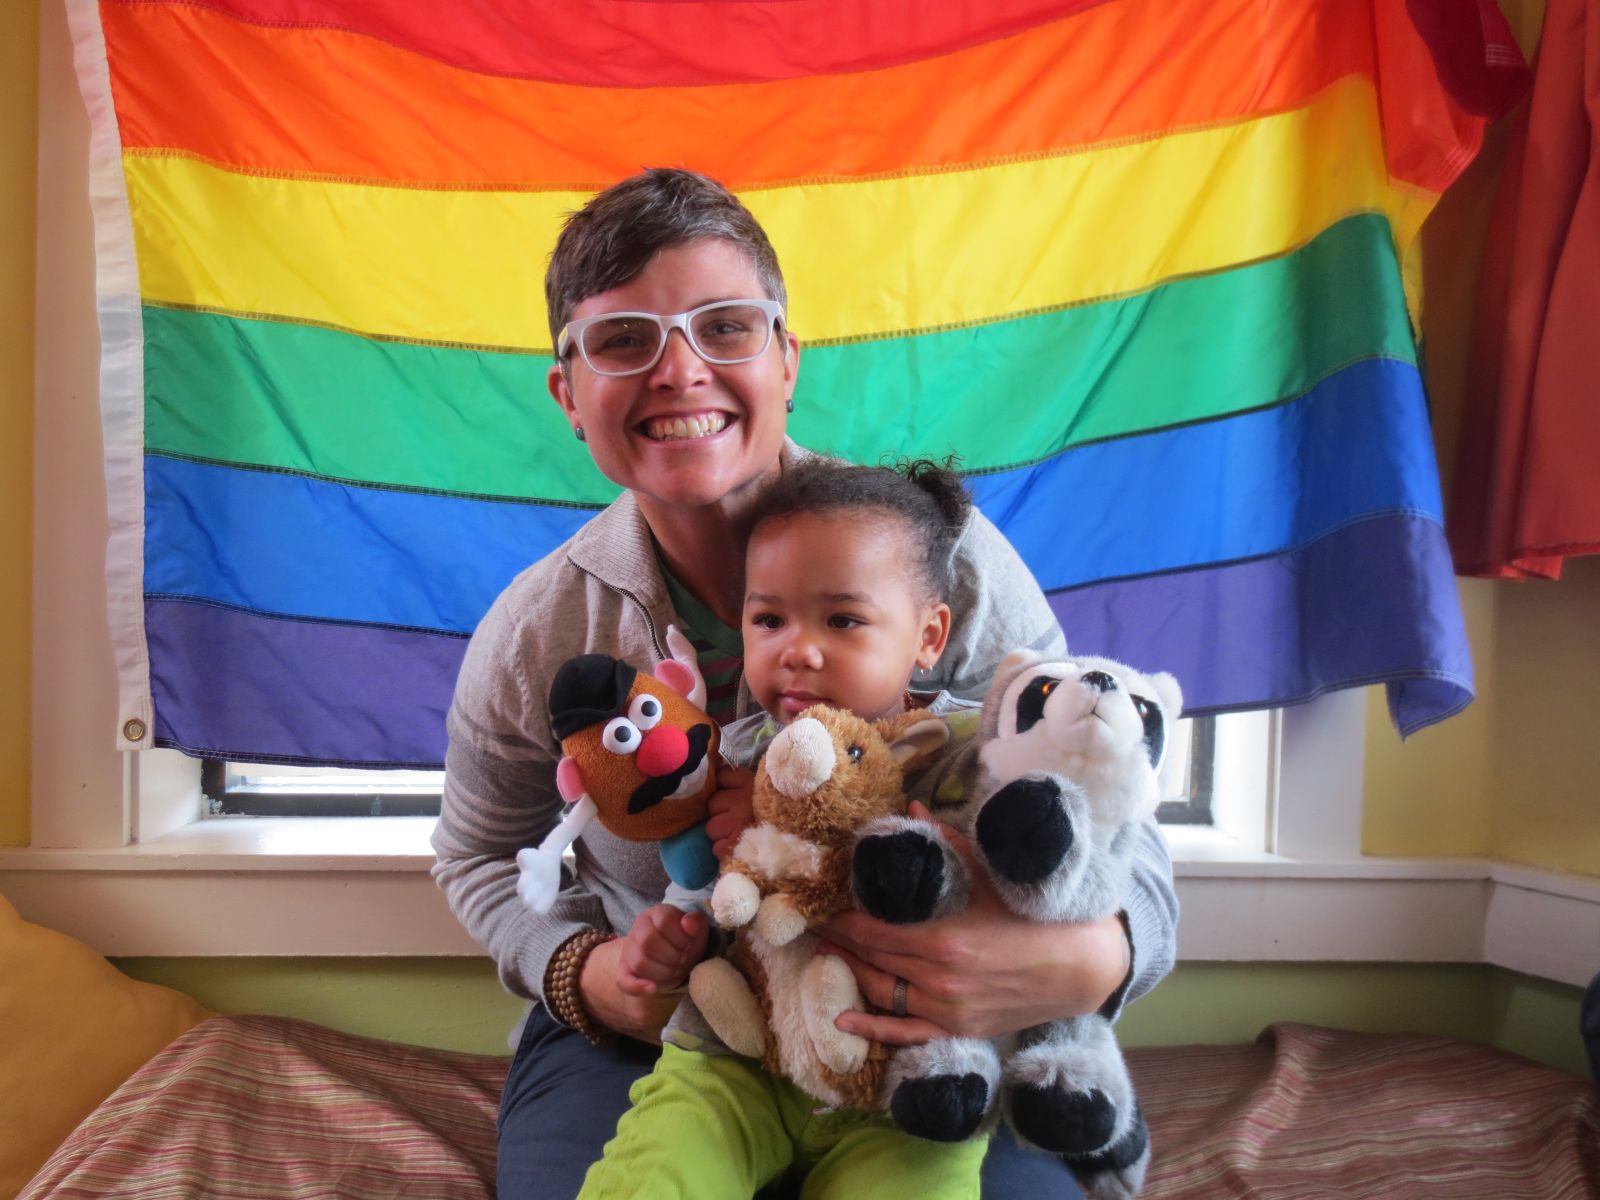 A smiling parent poses in front of a rainbow flag with their child, who is holding several stuffed animals.